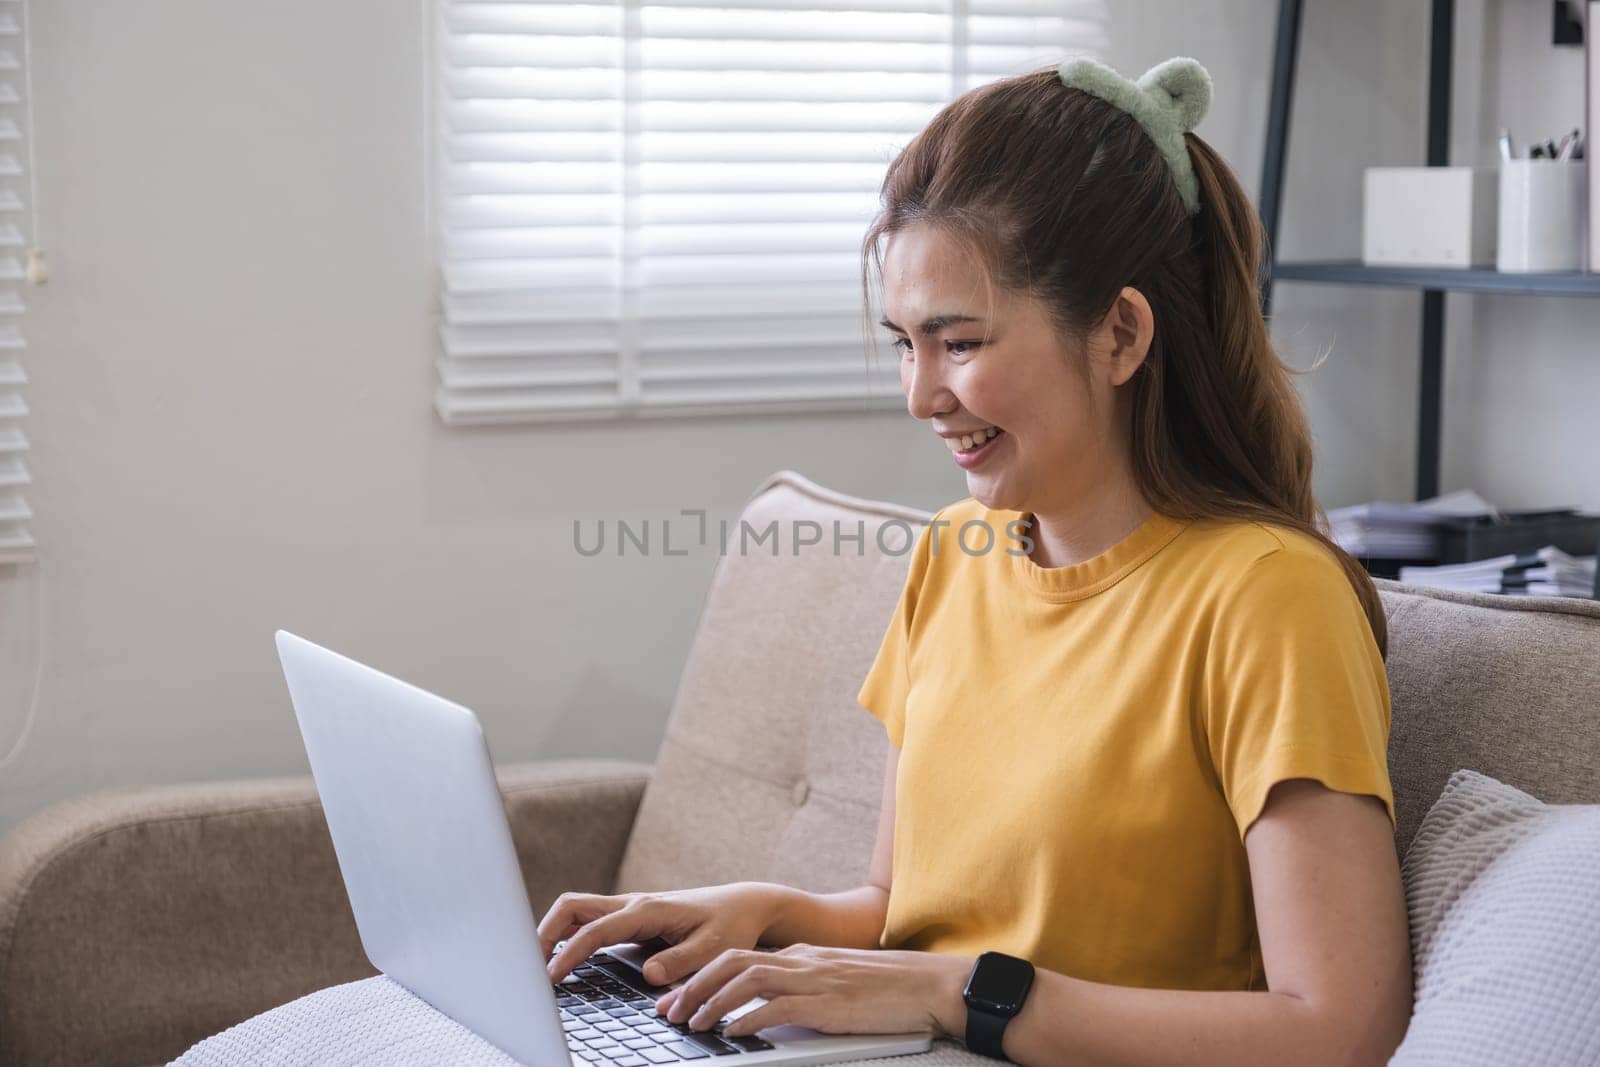 A woman is sitting on a couch with a laptop in front of her.